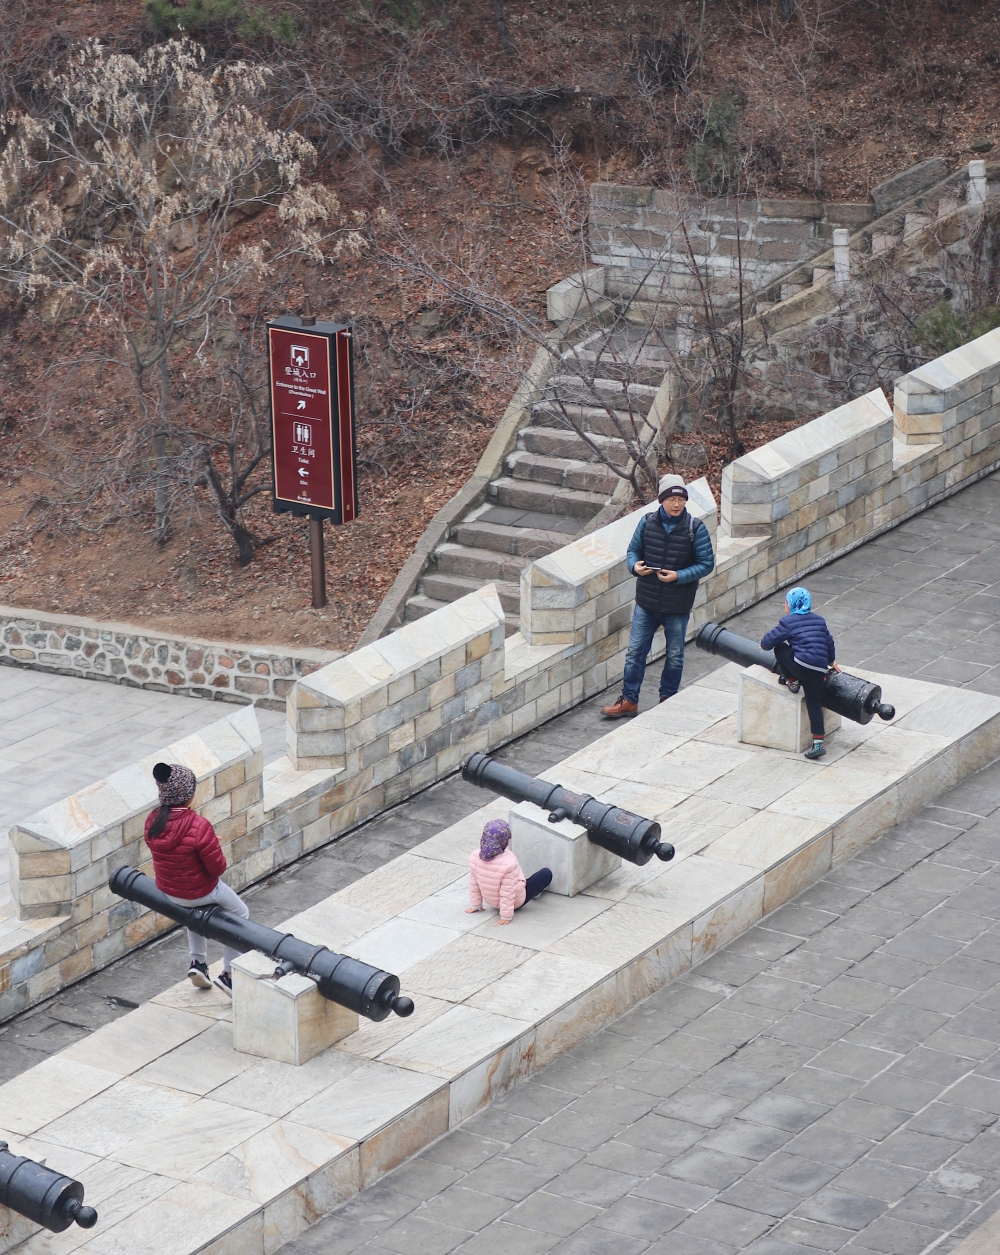 BRINGING YOUR FAMILY IN THE GREAT WALL?